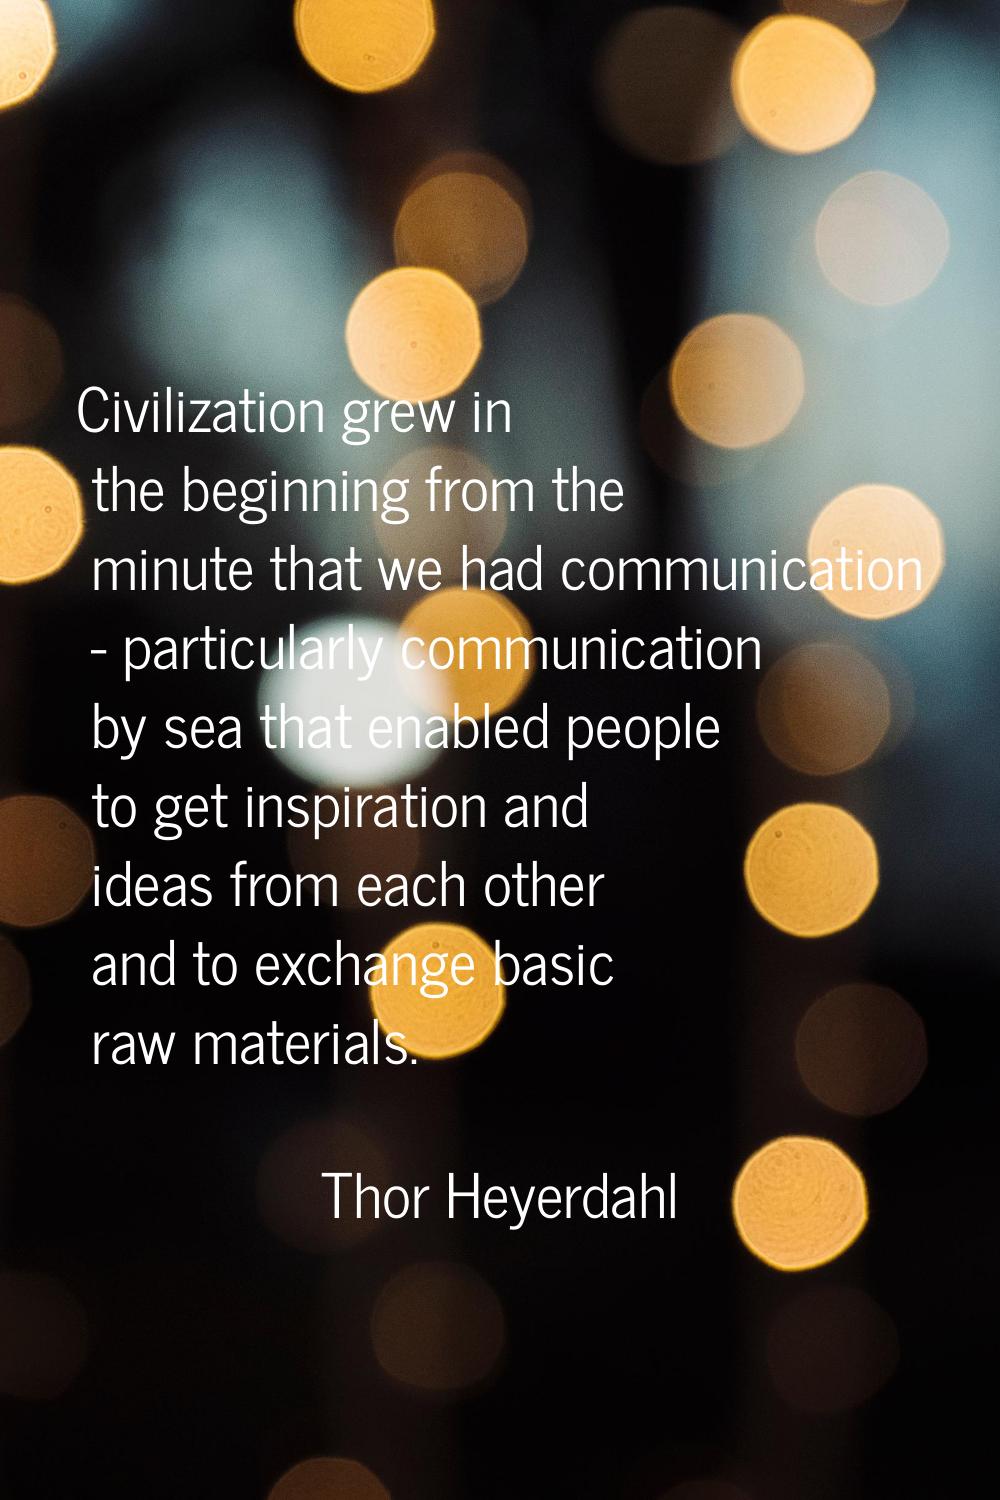 Civilization grew in the beginning from the minute that we had communication - particularly communi